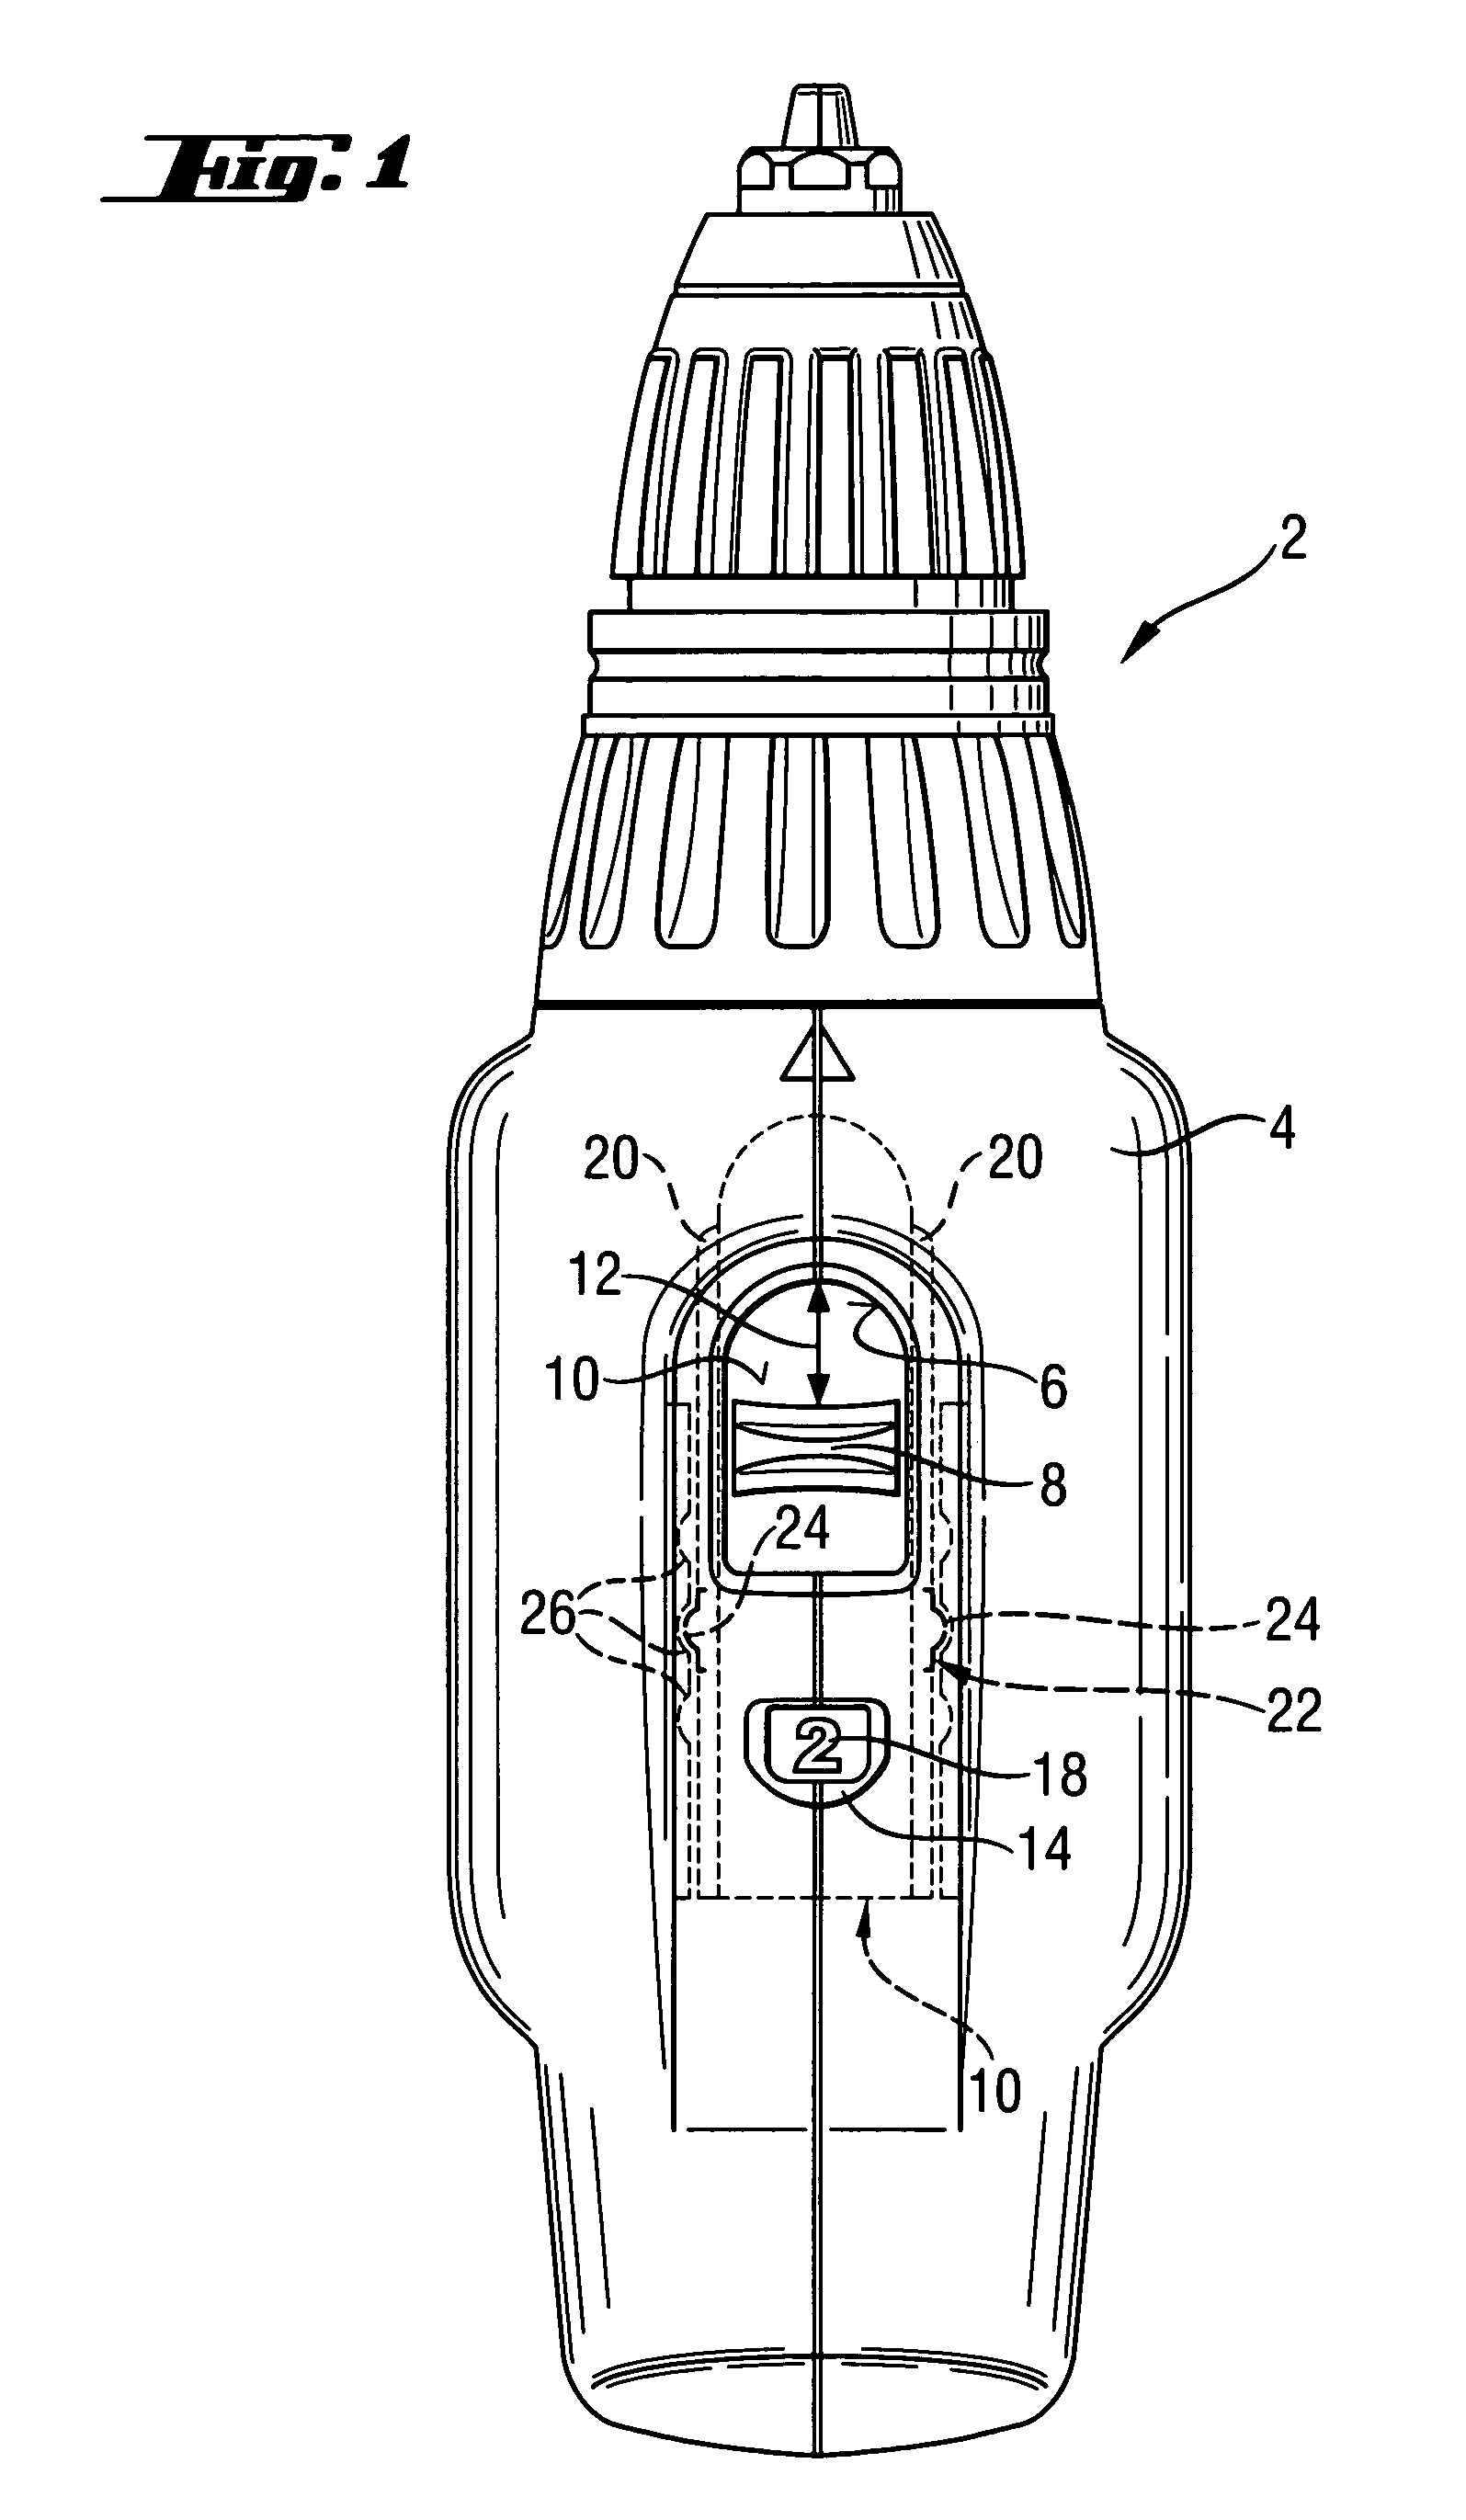 Motor-driven hand-held tool with functional step display